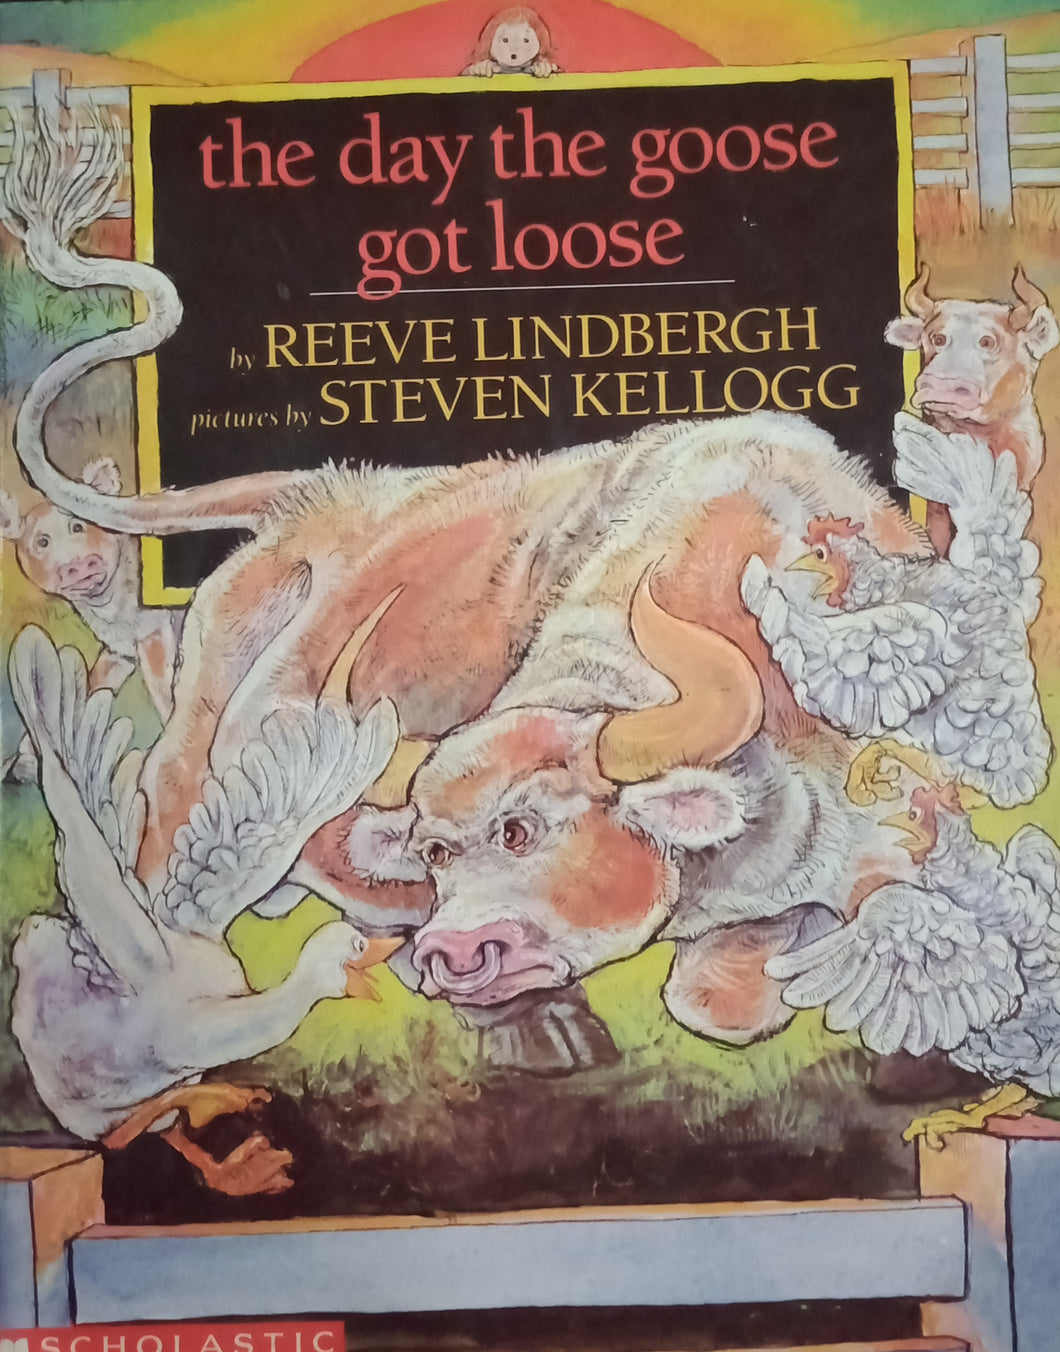 The Day The Goose Got Loose by Reeve Lindbergh